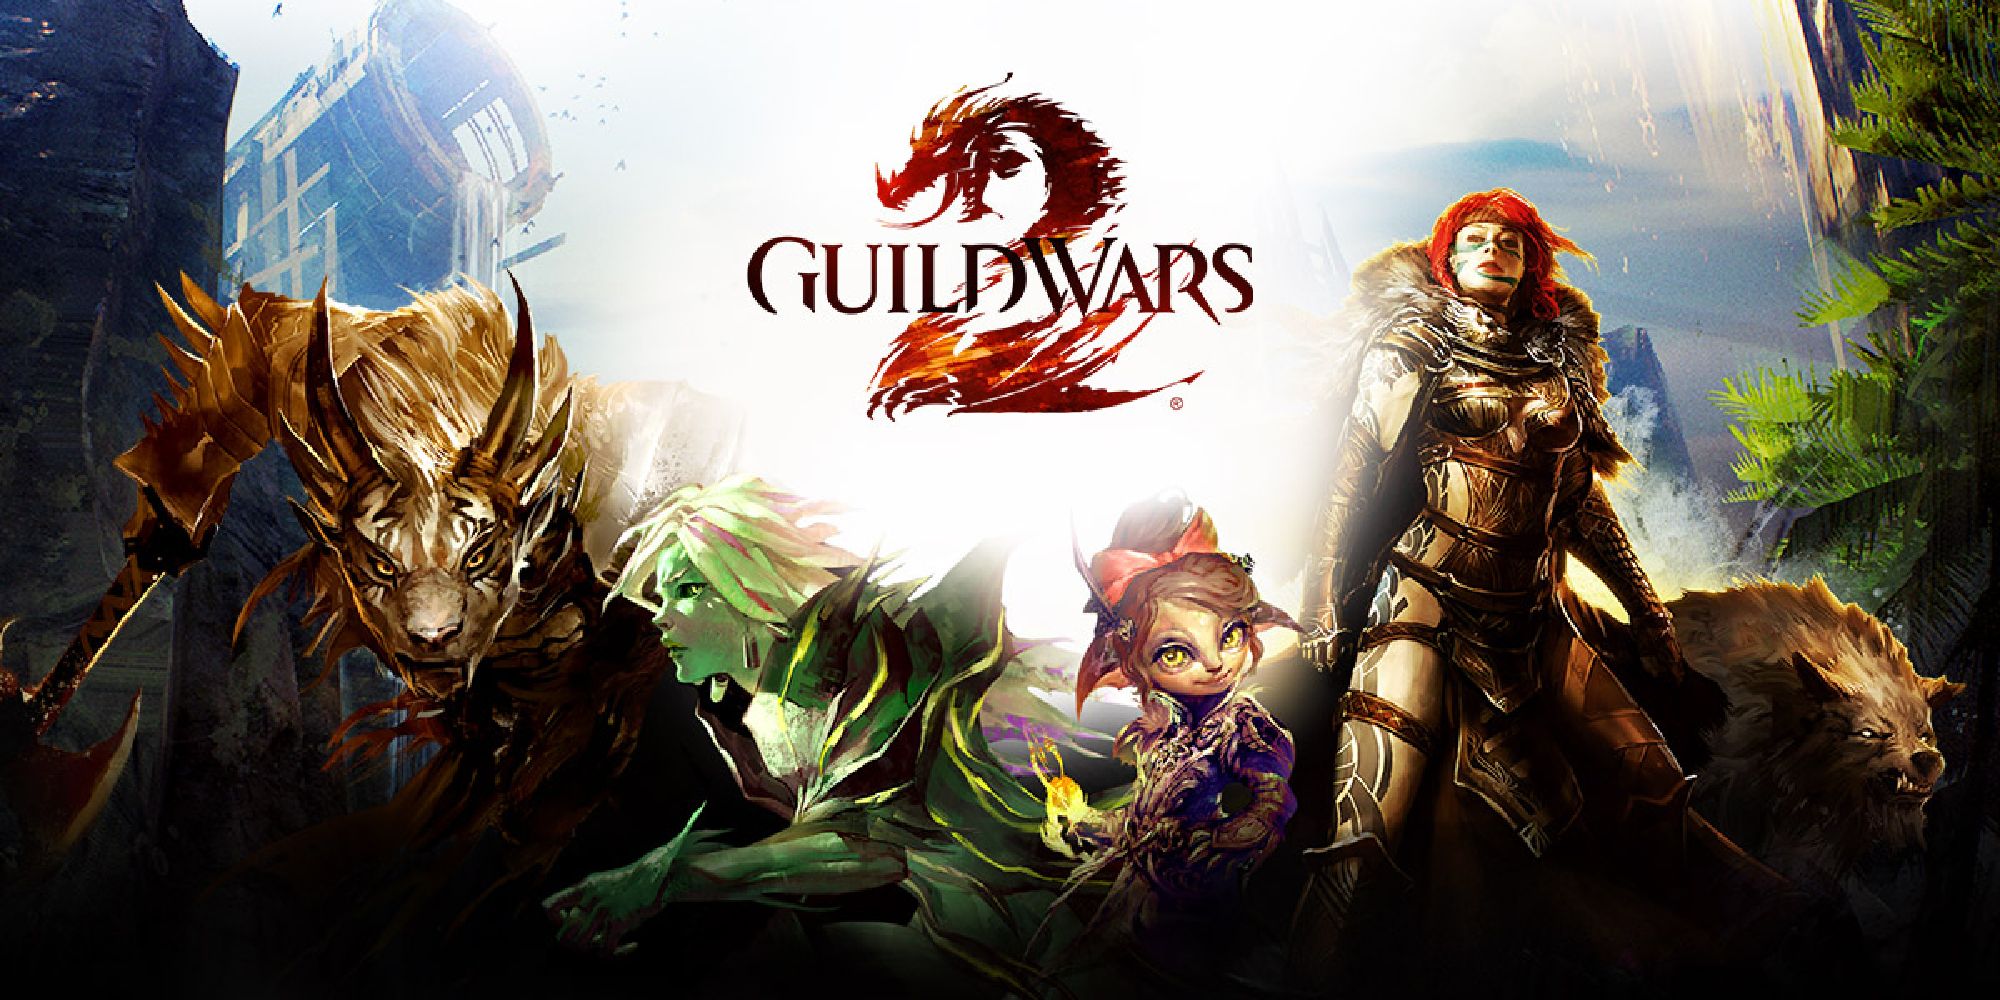 official art from gw2 with four race leaders